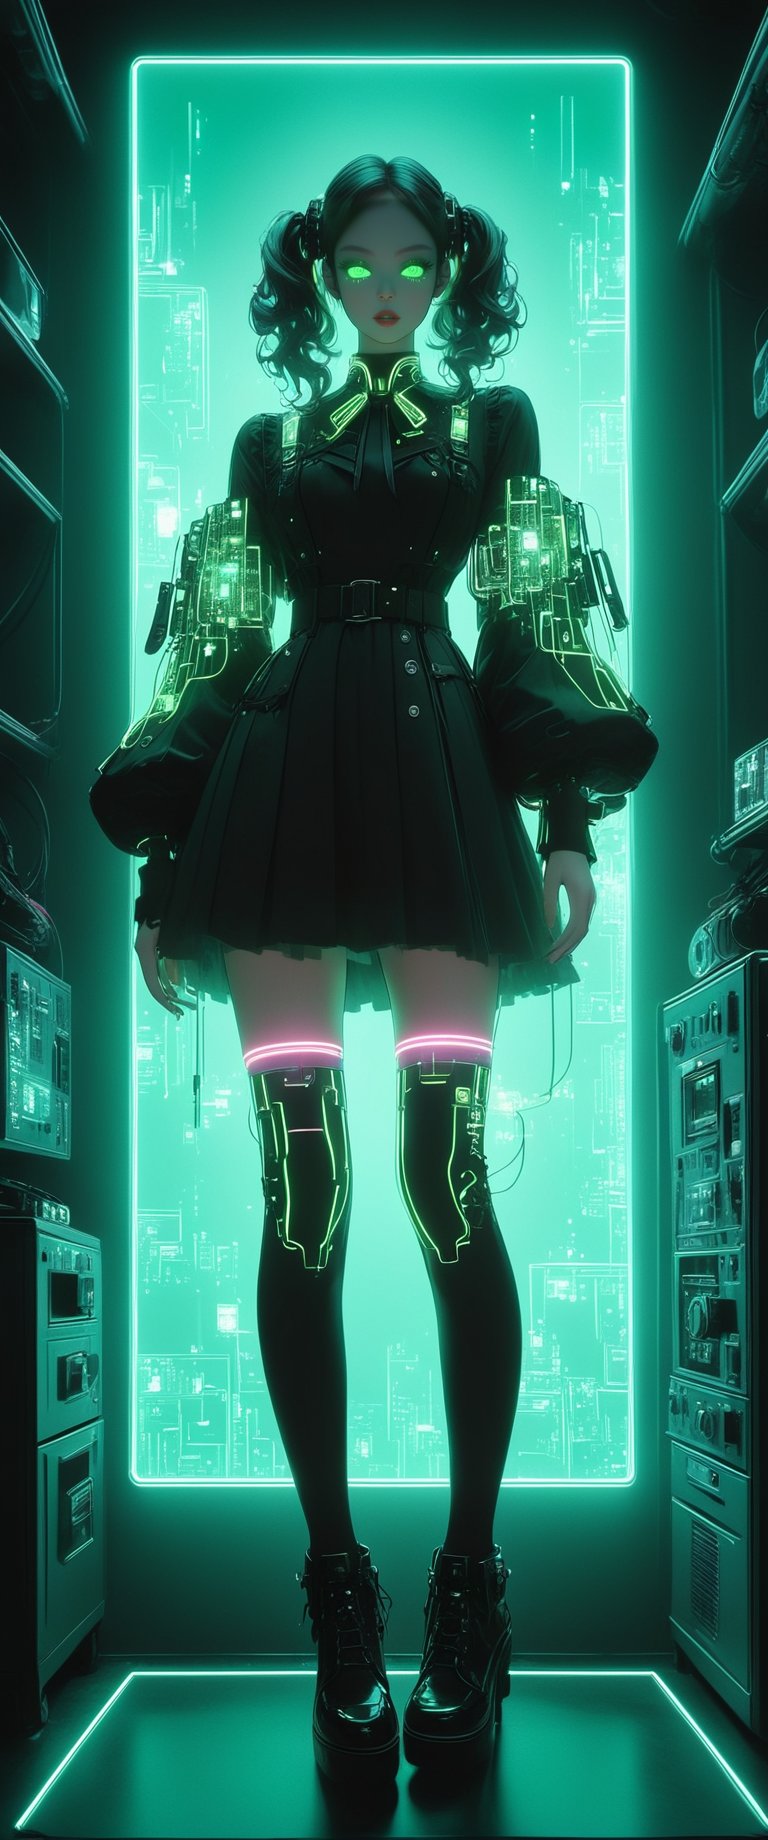 STICKER ON A WHITE BACKGROUND. green holographic silhouette, knee socks. I'm standing in a room with holograms. anime waifu. Stylish. Cute, hot, shiny. Highly detailed uhd anime wallpaper, cel digital animation

,neon photography style,ct-jeniiii,noir